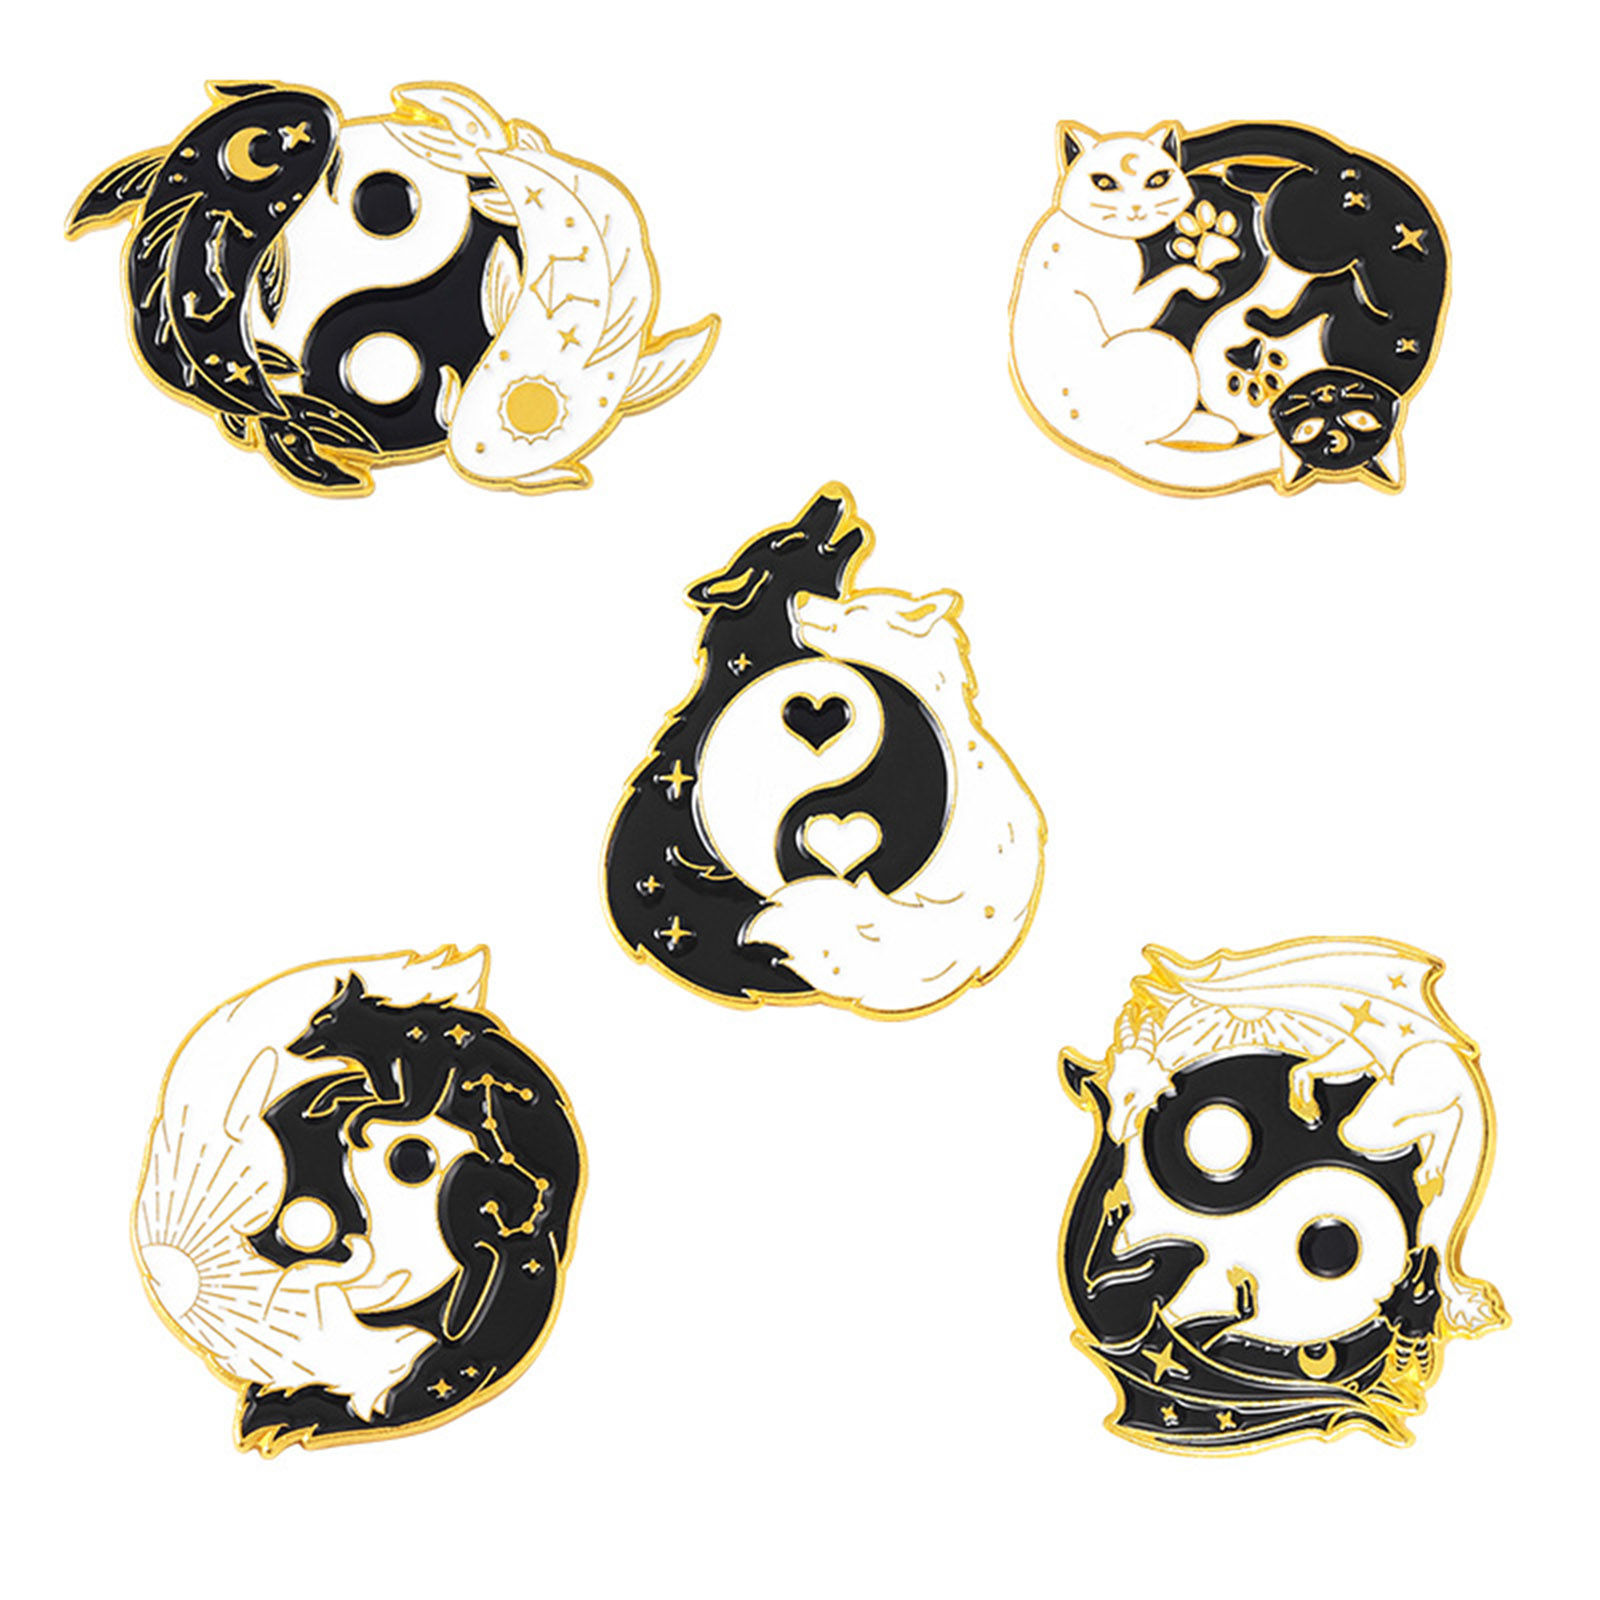 Picture of Religious Pin Brooches Animal Yin Yang Symbol Gold Plated Black & White Enamel